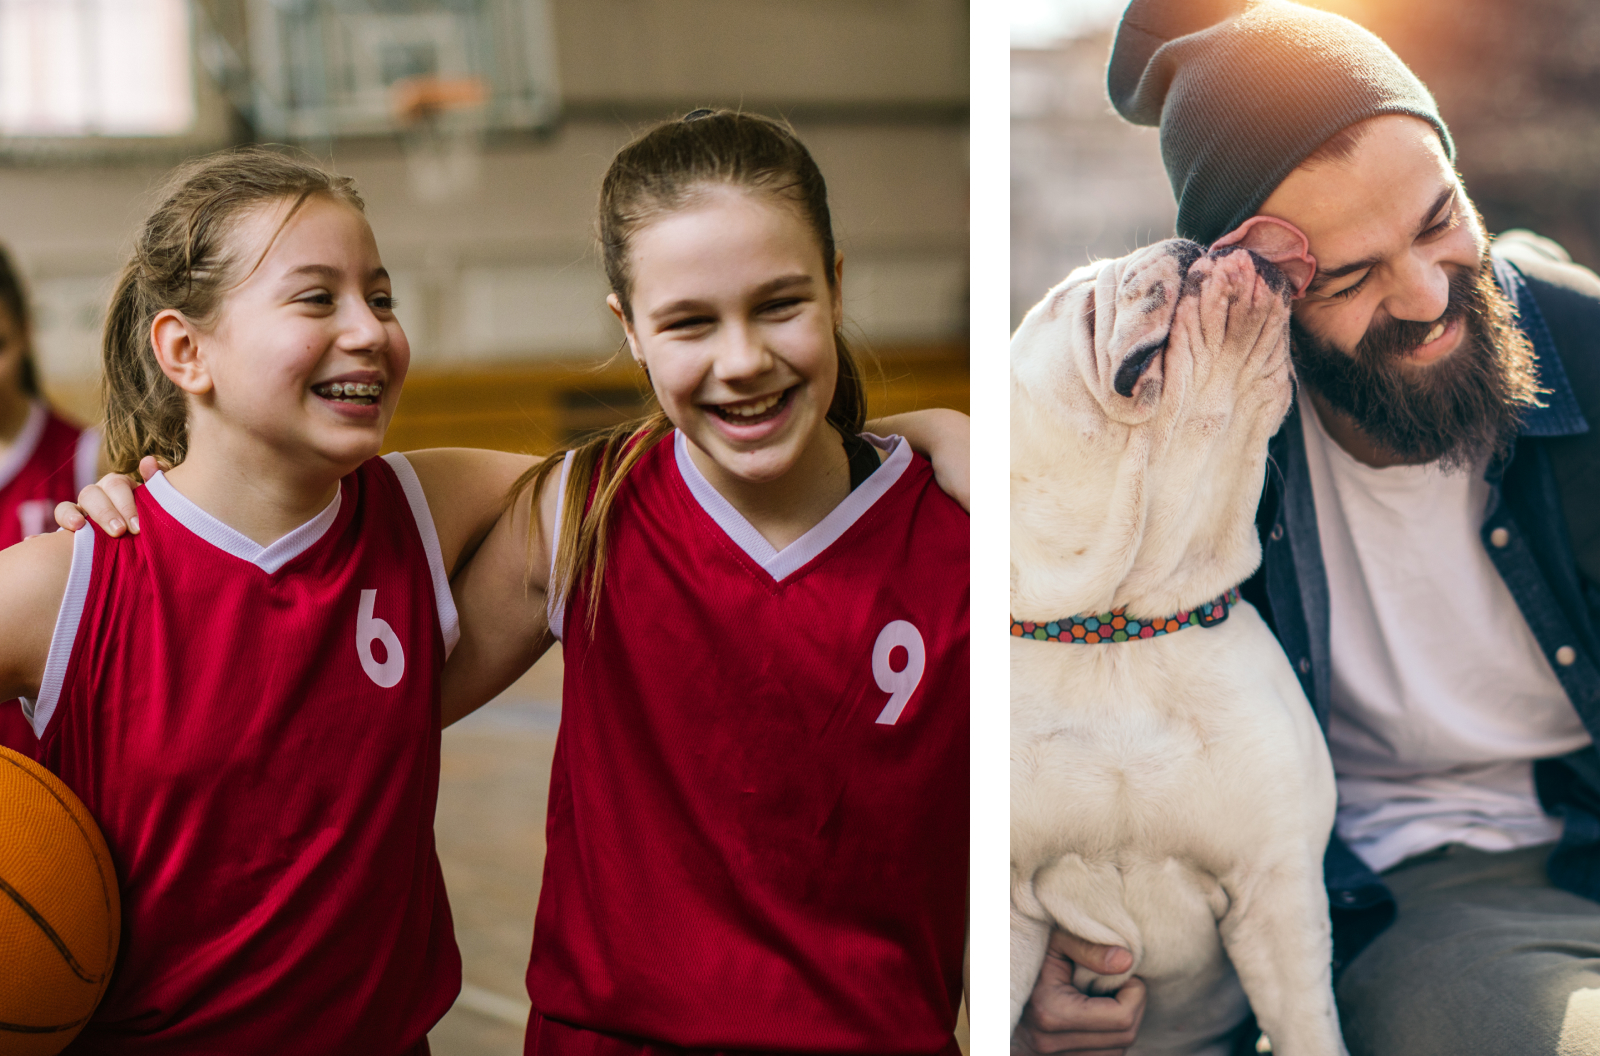 Two side-by-side pictures, one showing two friends embracing while playing basketball and the other a man with his dog.